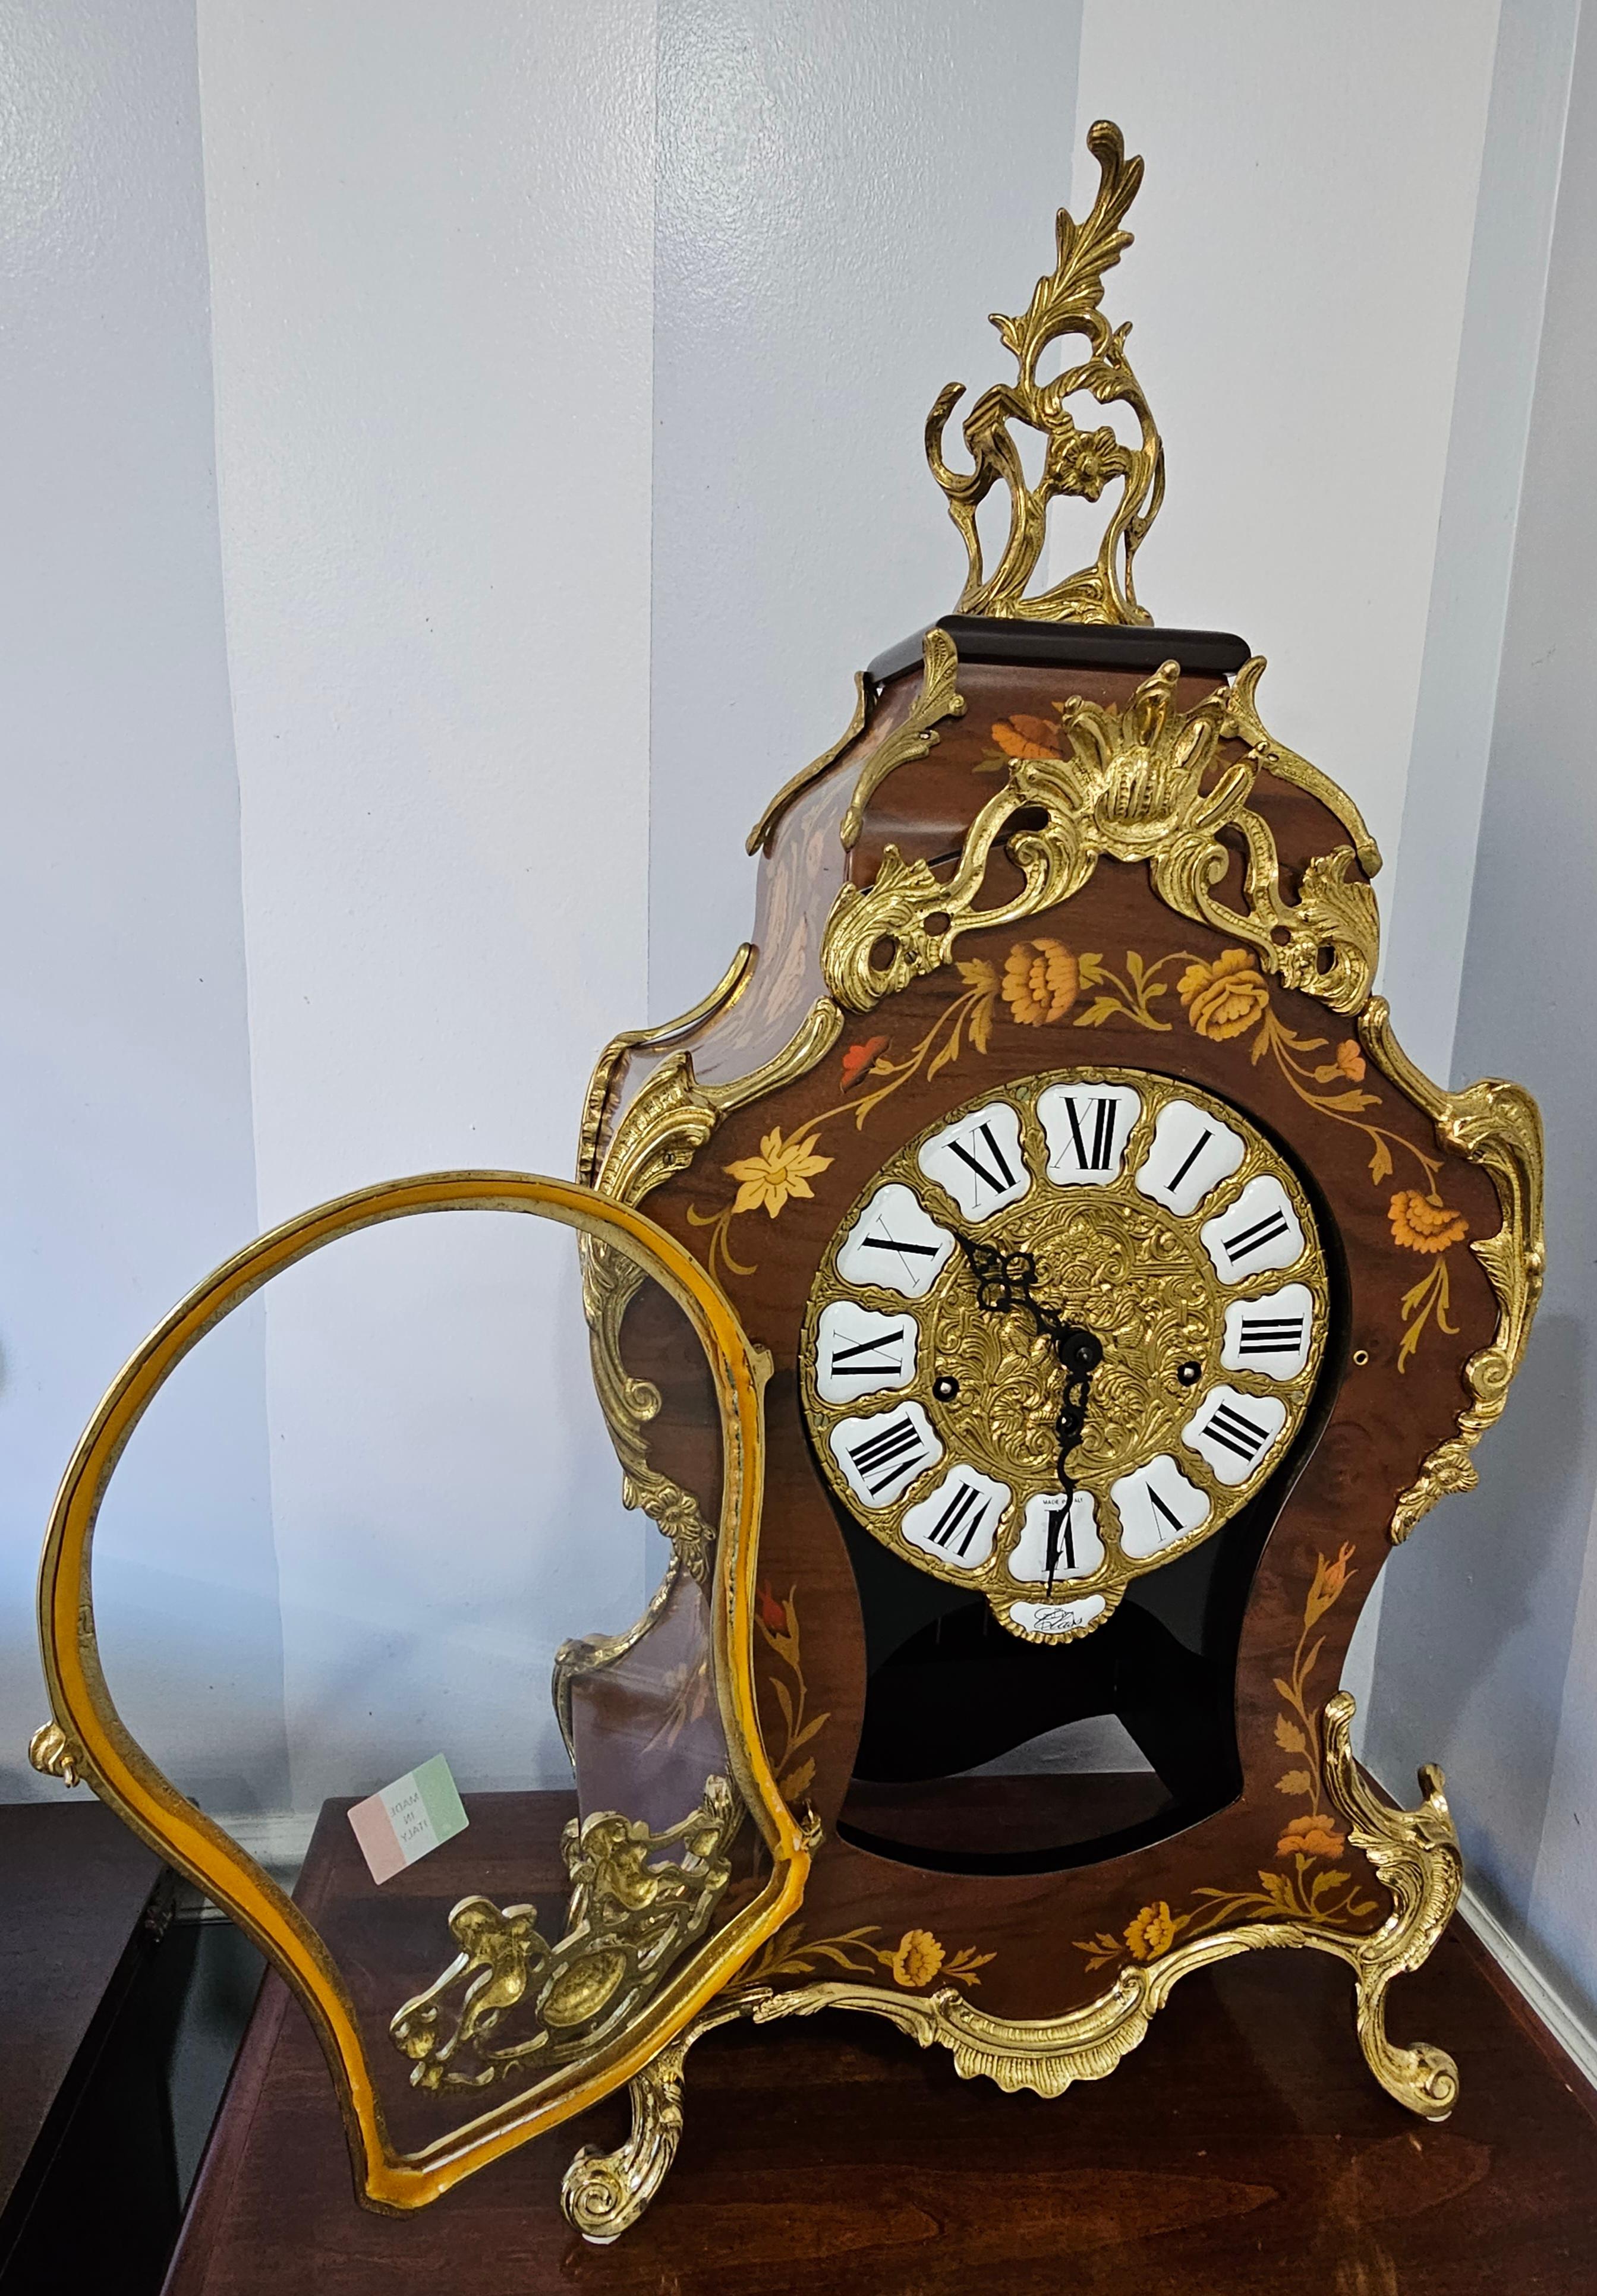 German New Franz Hermle Mantel Clock in DeArt Italian Fine Marquetry and Ormolu Case, N For Sale